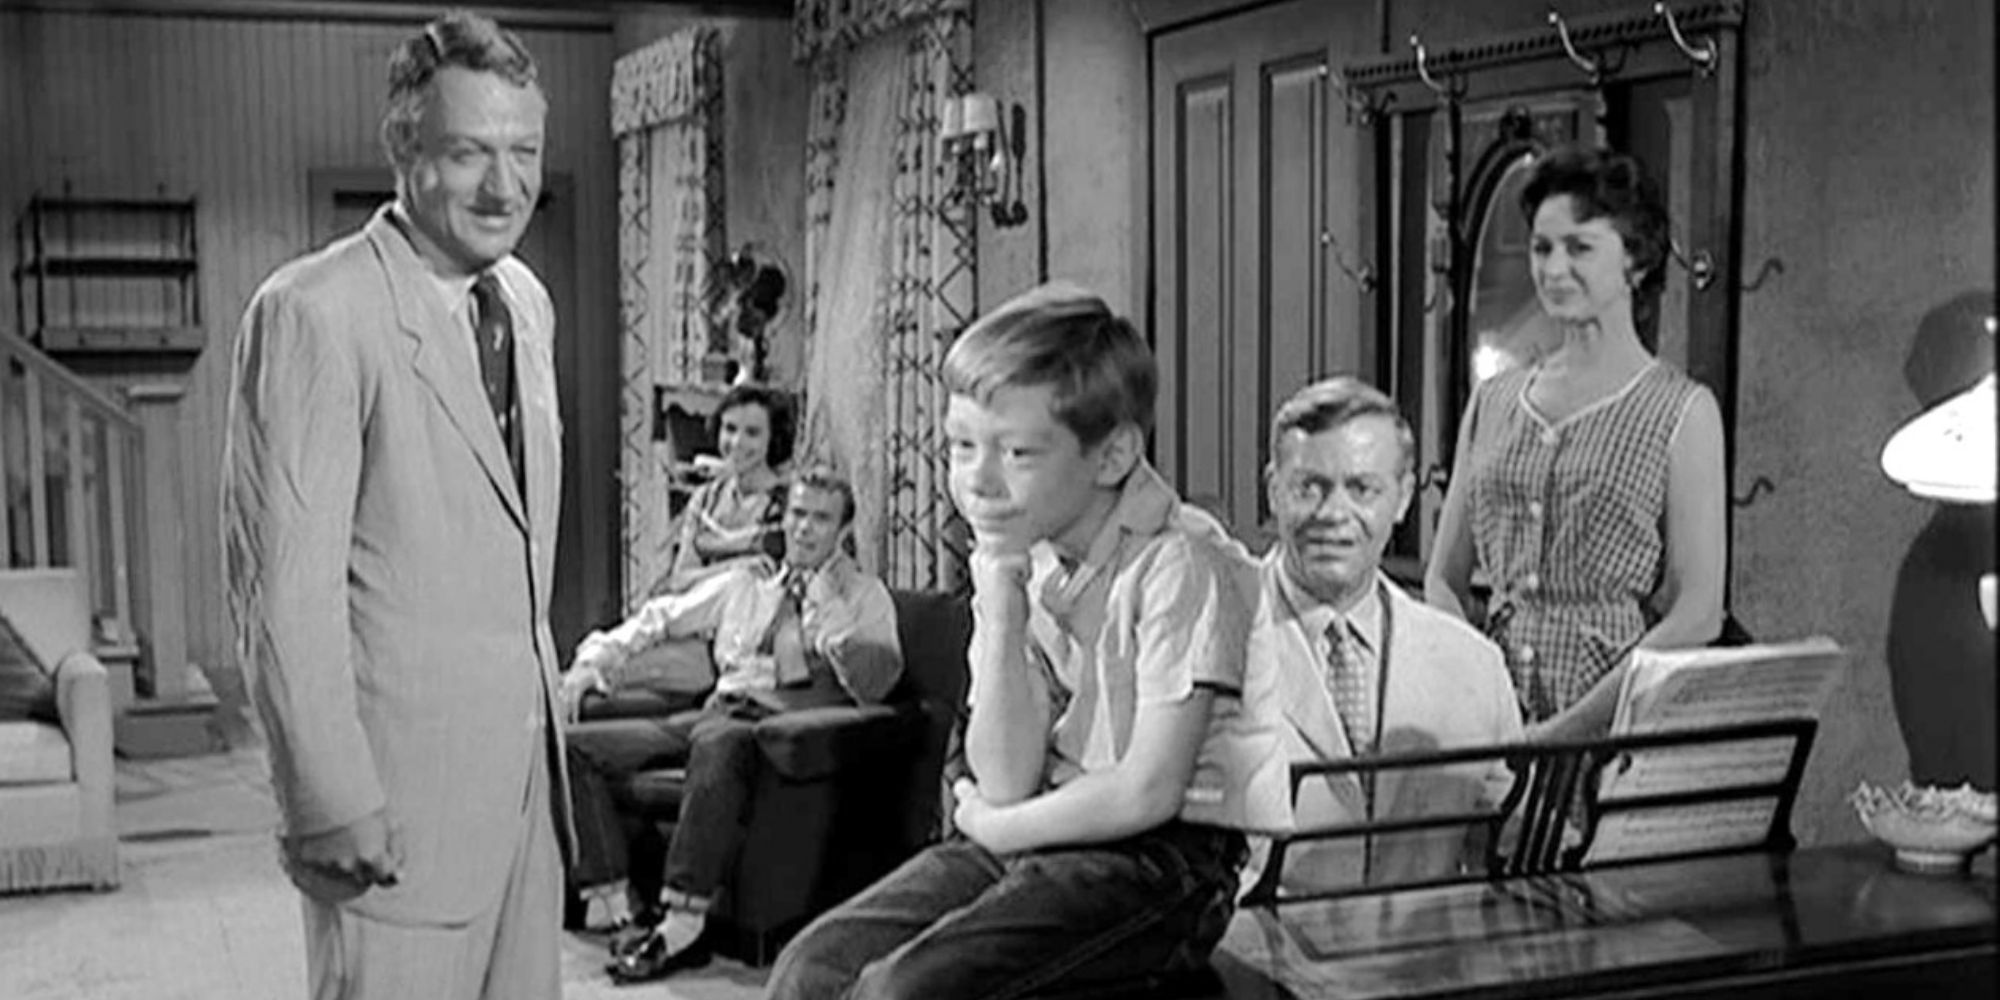 Black and white image of a family sitting in the living room in The Twilight Zone